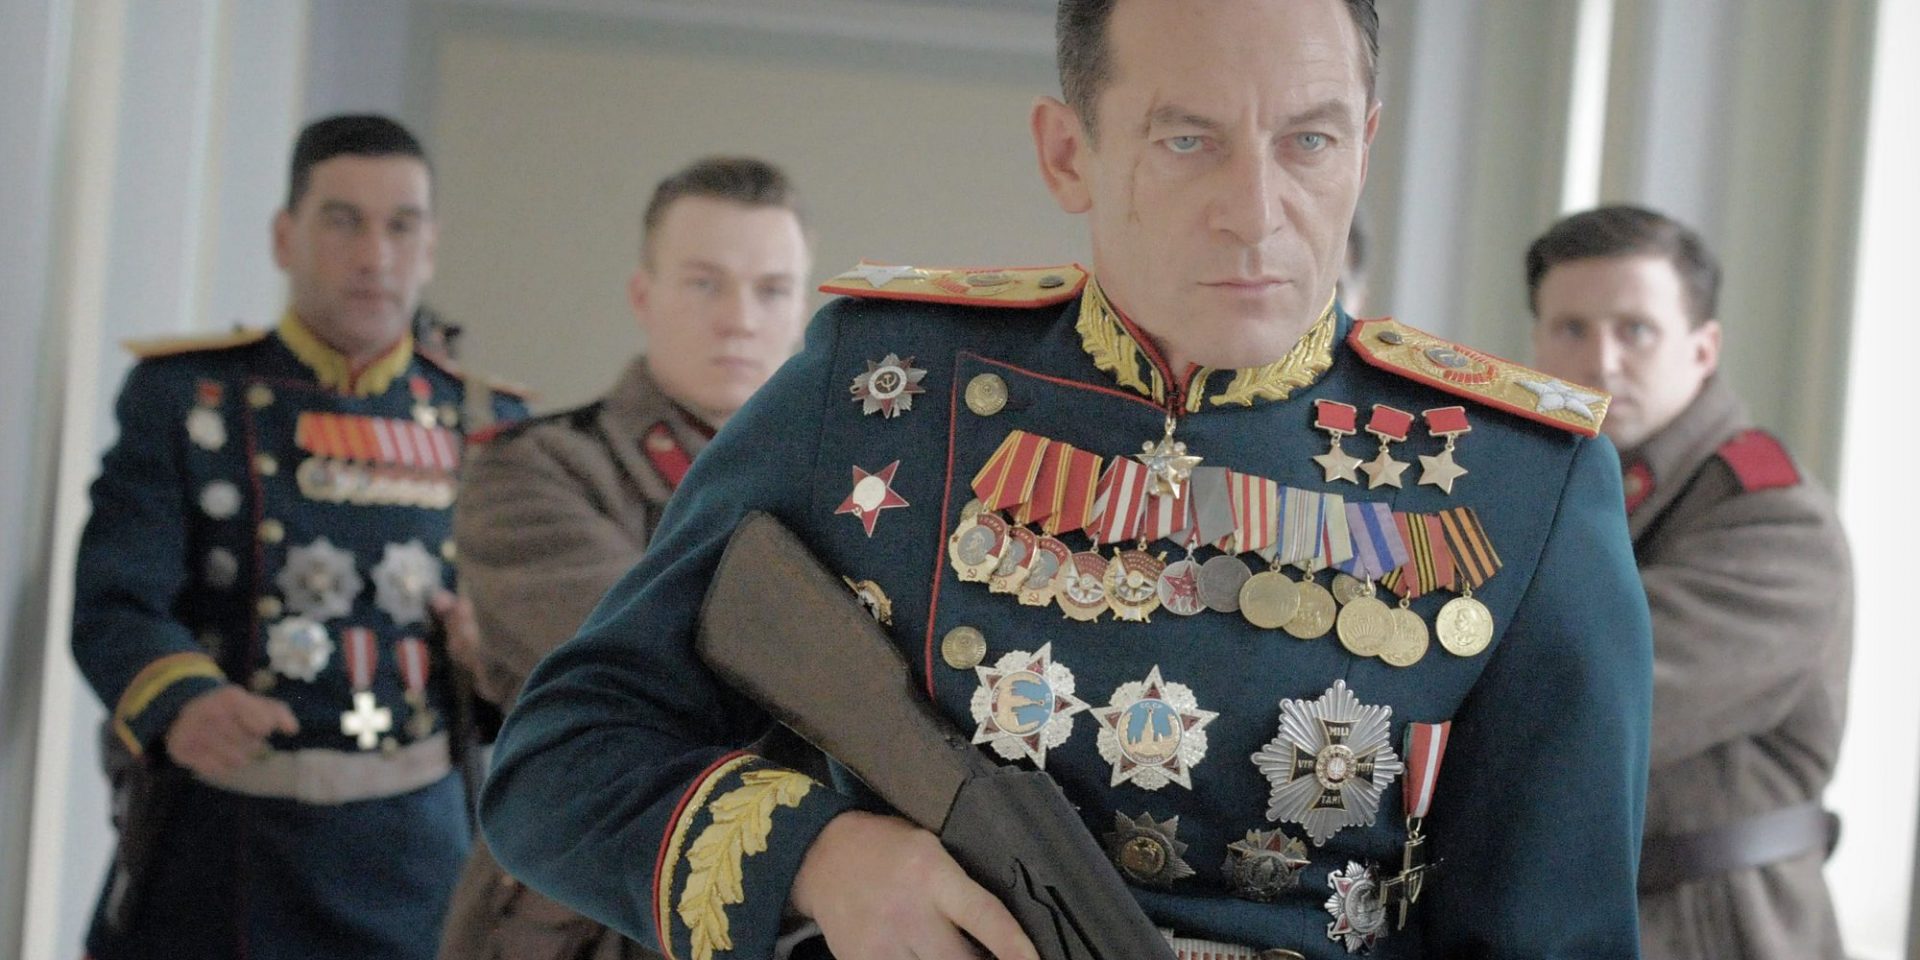 the-death-of-stalin